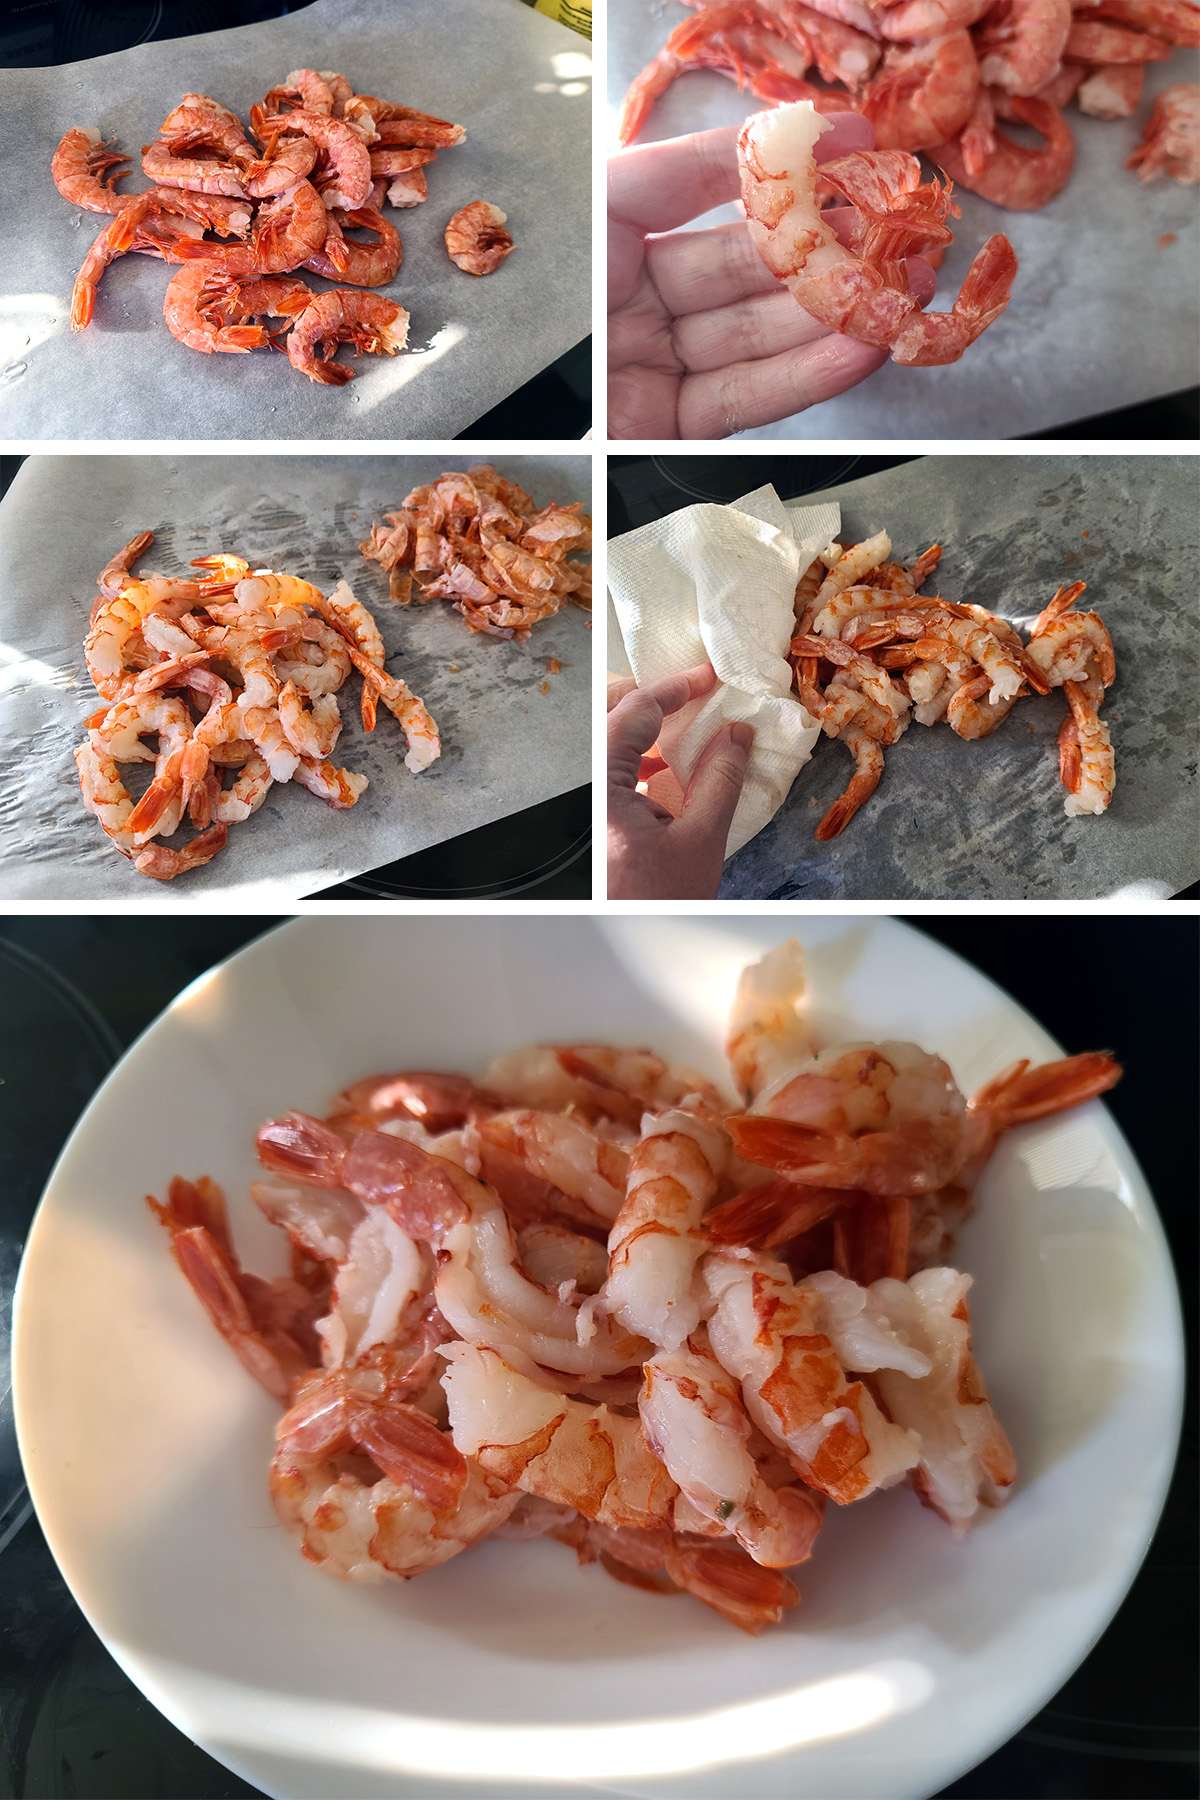 A 5 part image showing the shrimp being peeled and prepared.